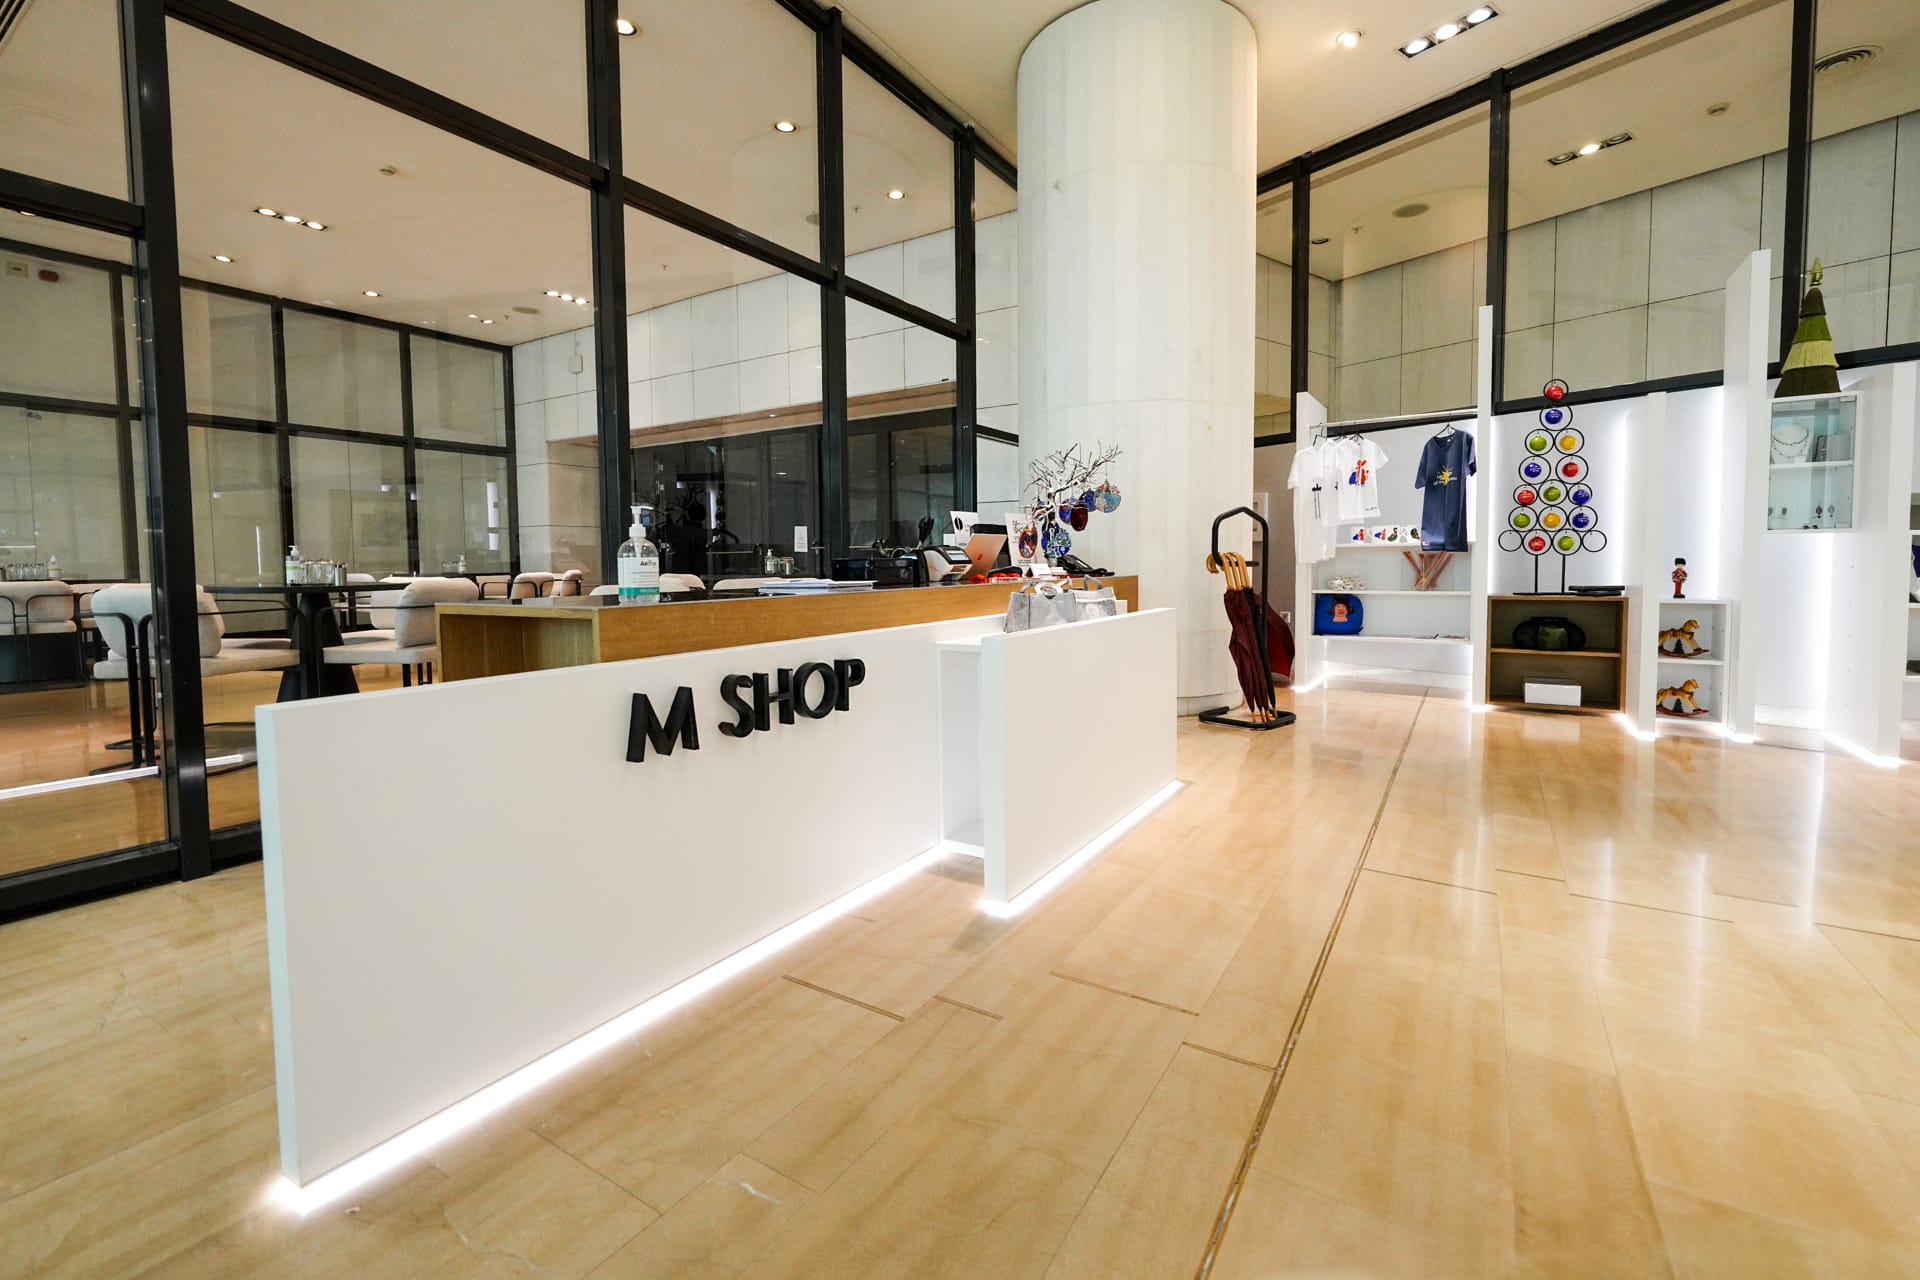 The M Shop in the Athens Megaron